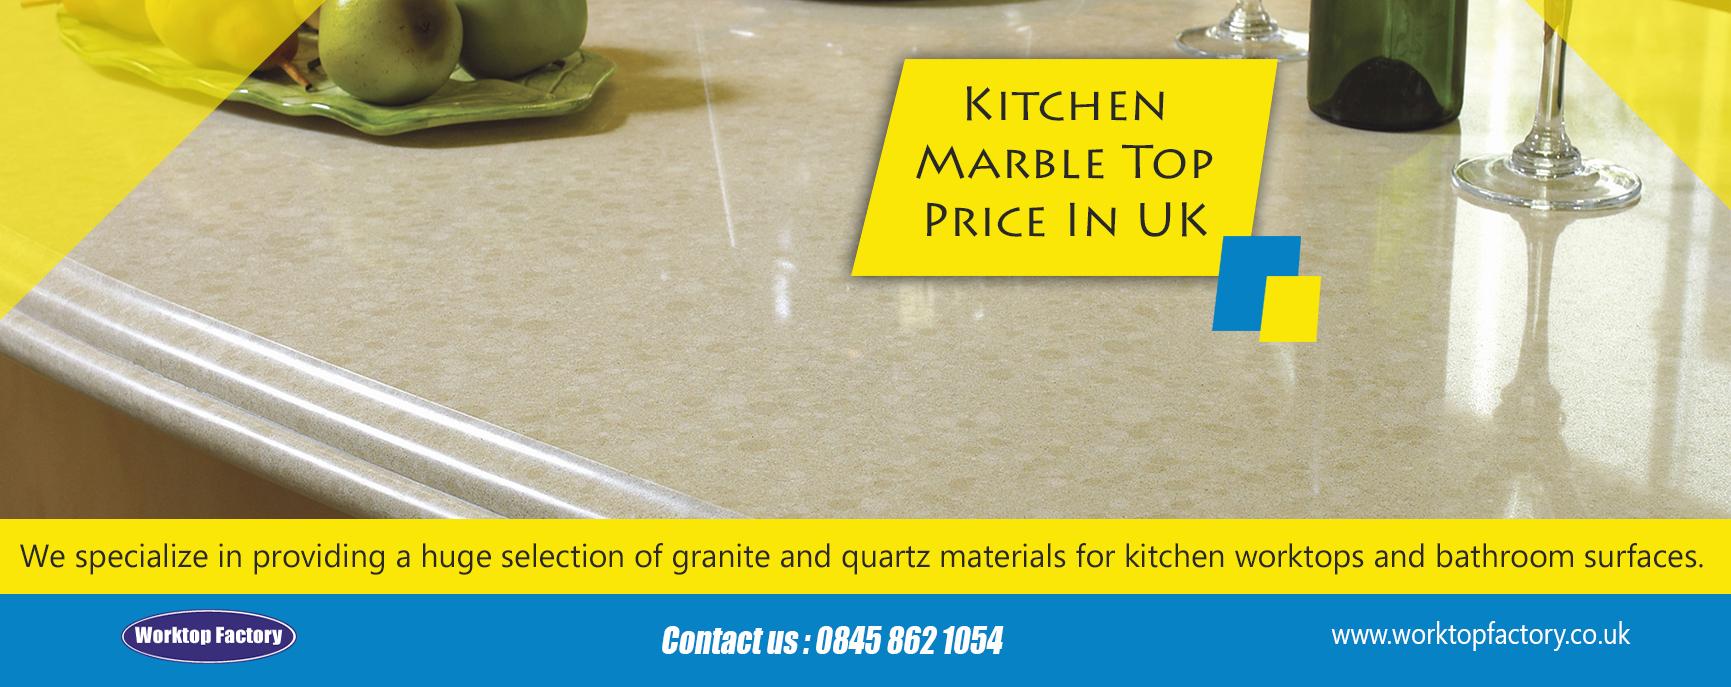 Kitchen Marble Top Price In UK